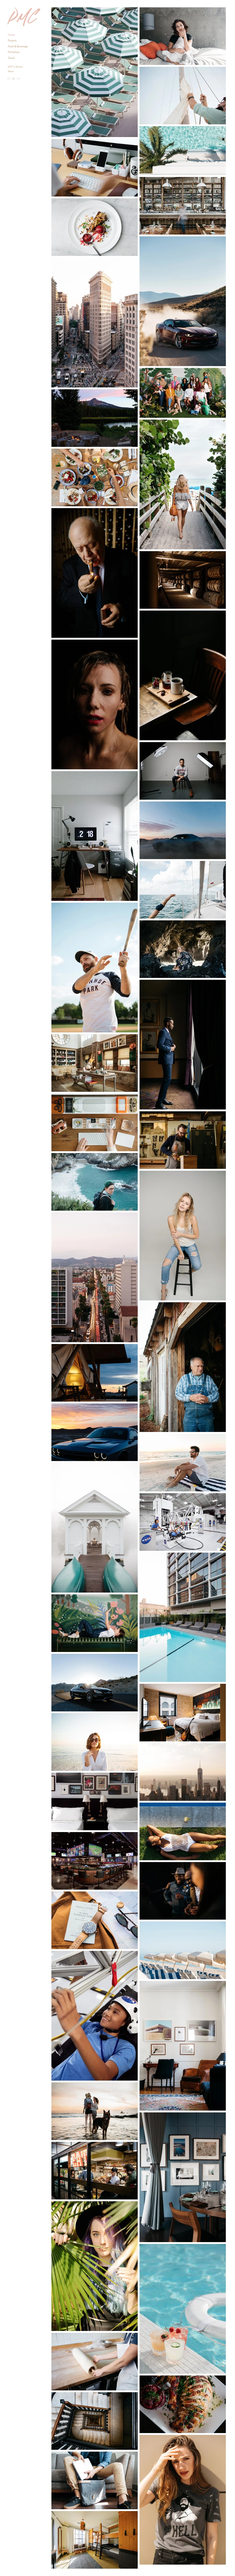 Patrick Michael Chin Landing Page Example: Patrick Michael Chin is a commercial travel, lifestyle and portrait photographer based in Orlando, Florida.